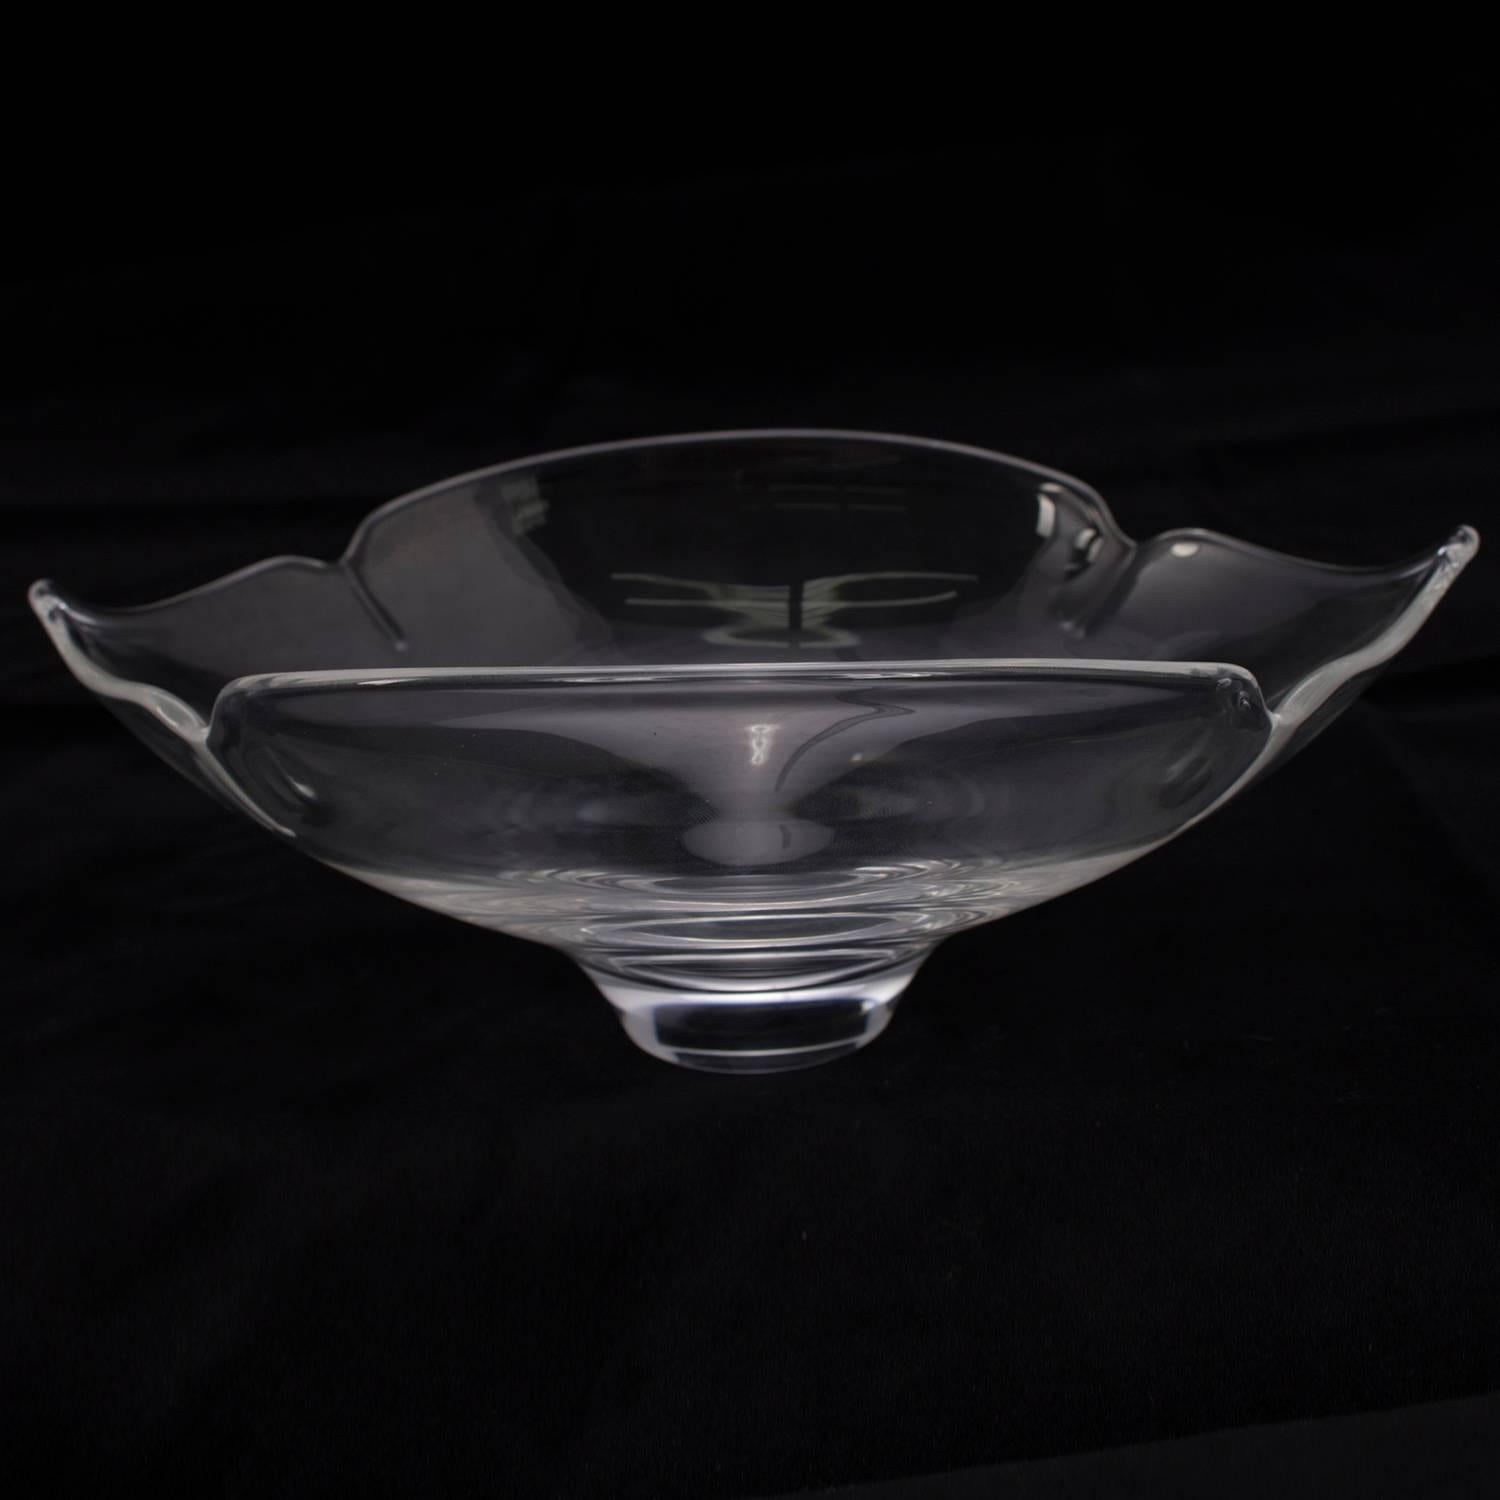 Steuben crystal console bowl features freeform elongated and low profile stylized poppy flower quatrefoil form with four leaves or petals and pedestal base, designed by Donald Pollard, signed on base, 20th century

Measures: 3.5